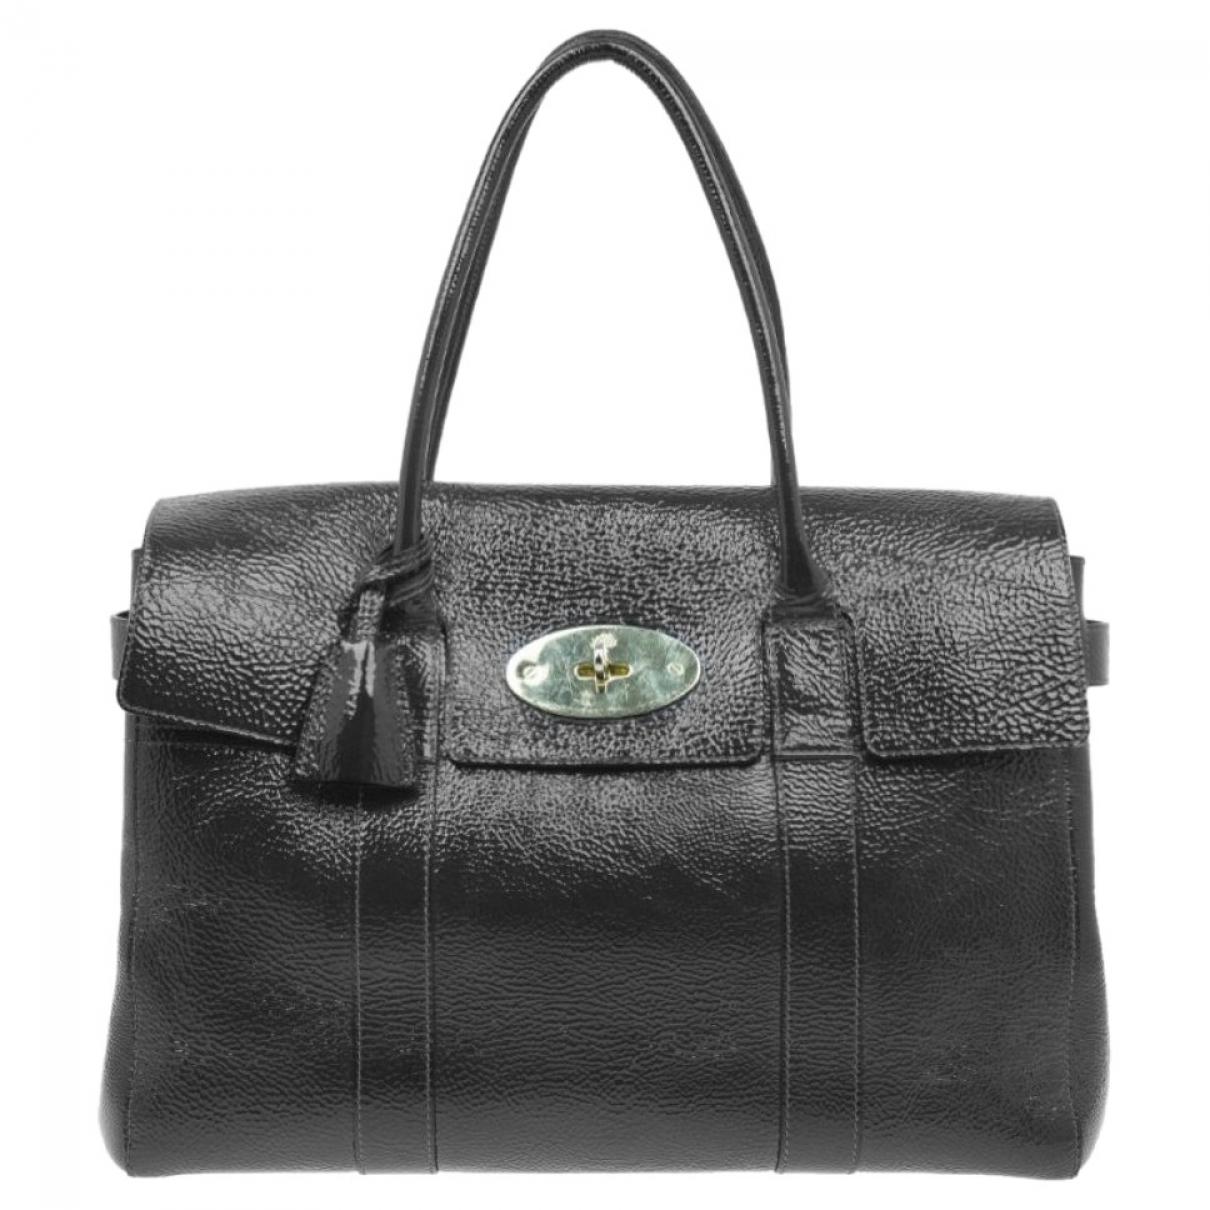 Mulberry Bayswater Grey Patent Leather Handbag in Gray - Lyst